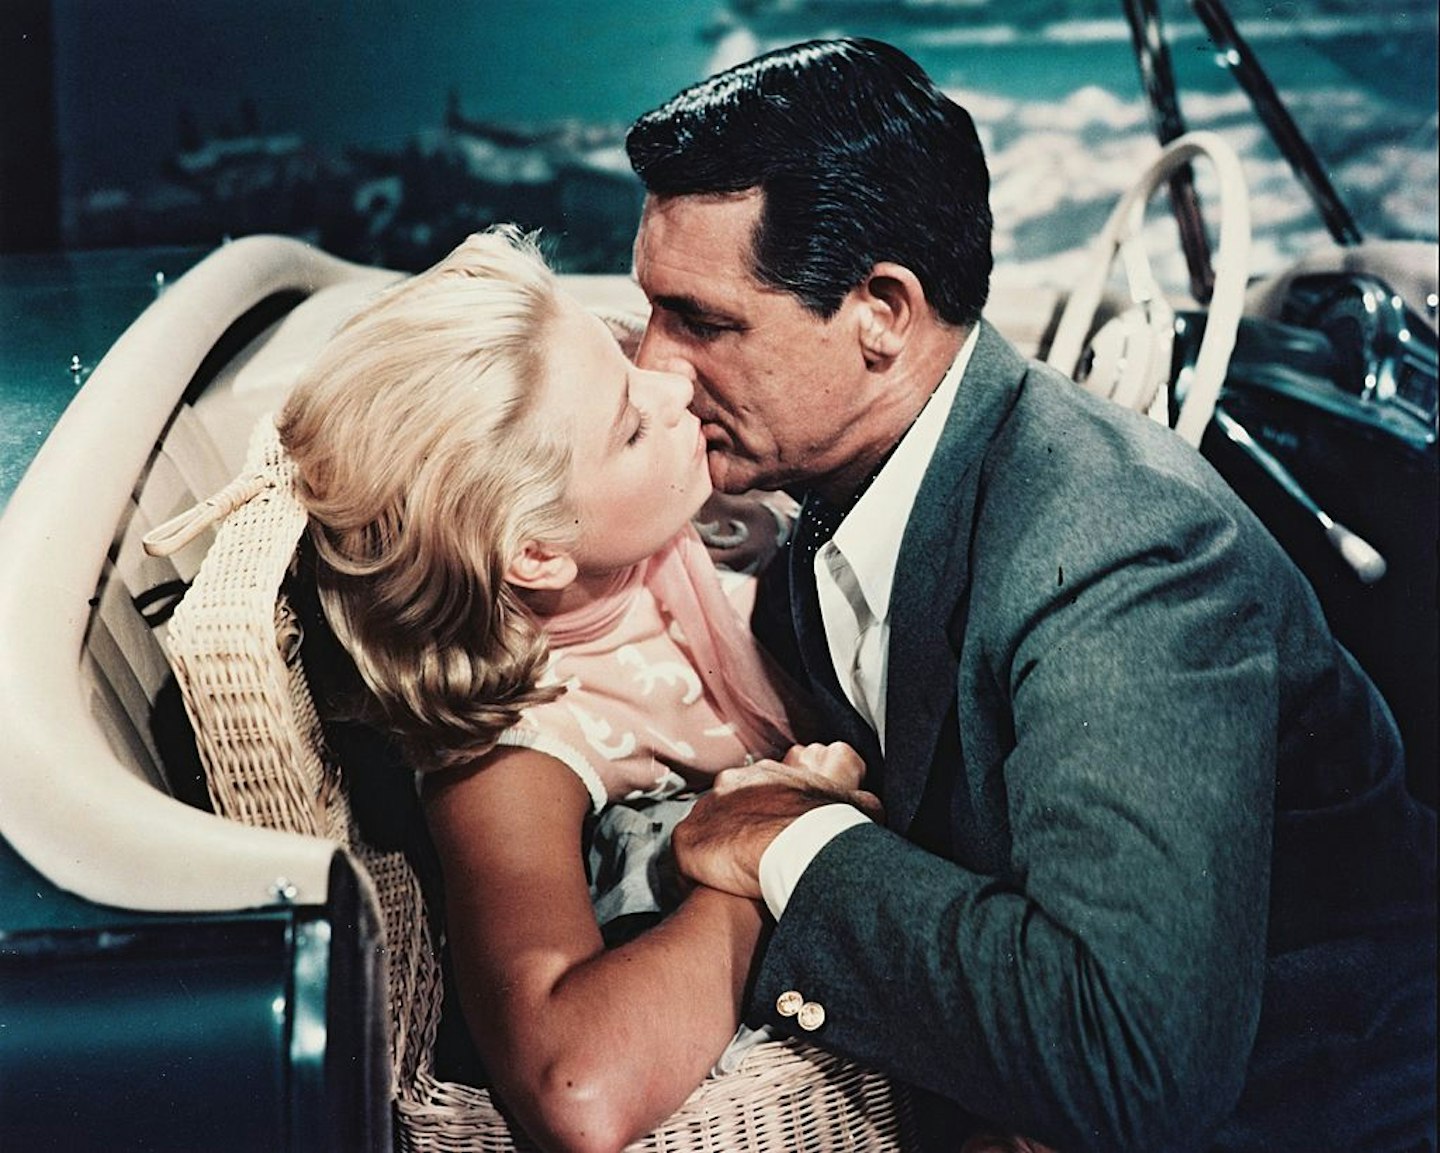 Grace Kelly movies: to catch a thief